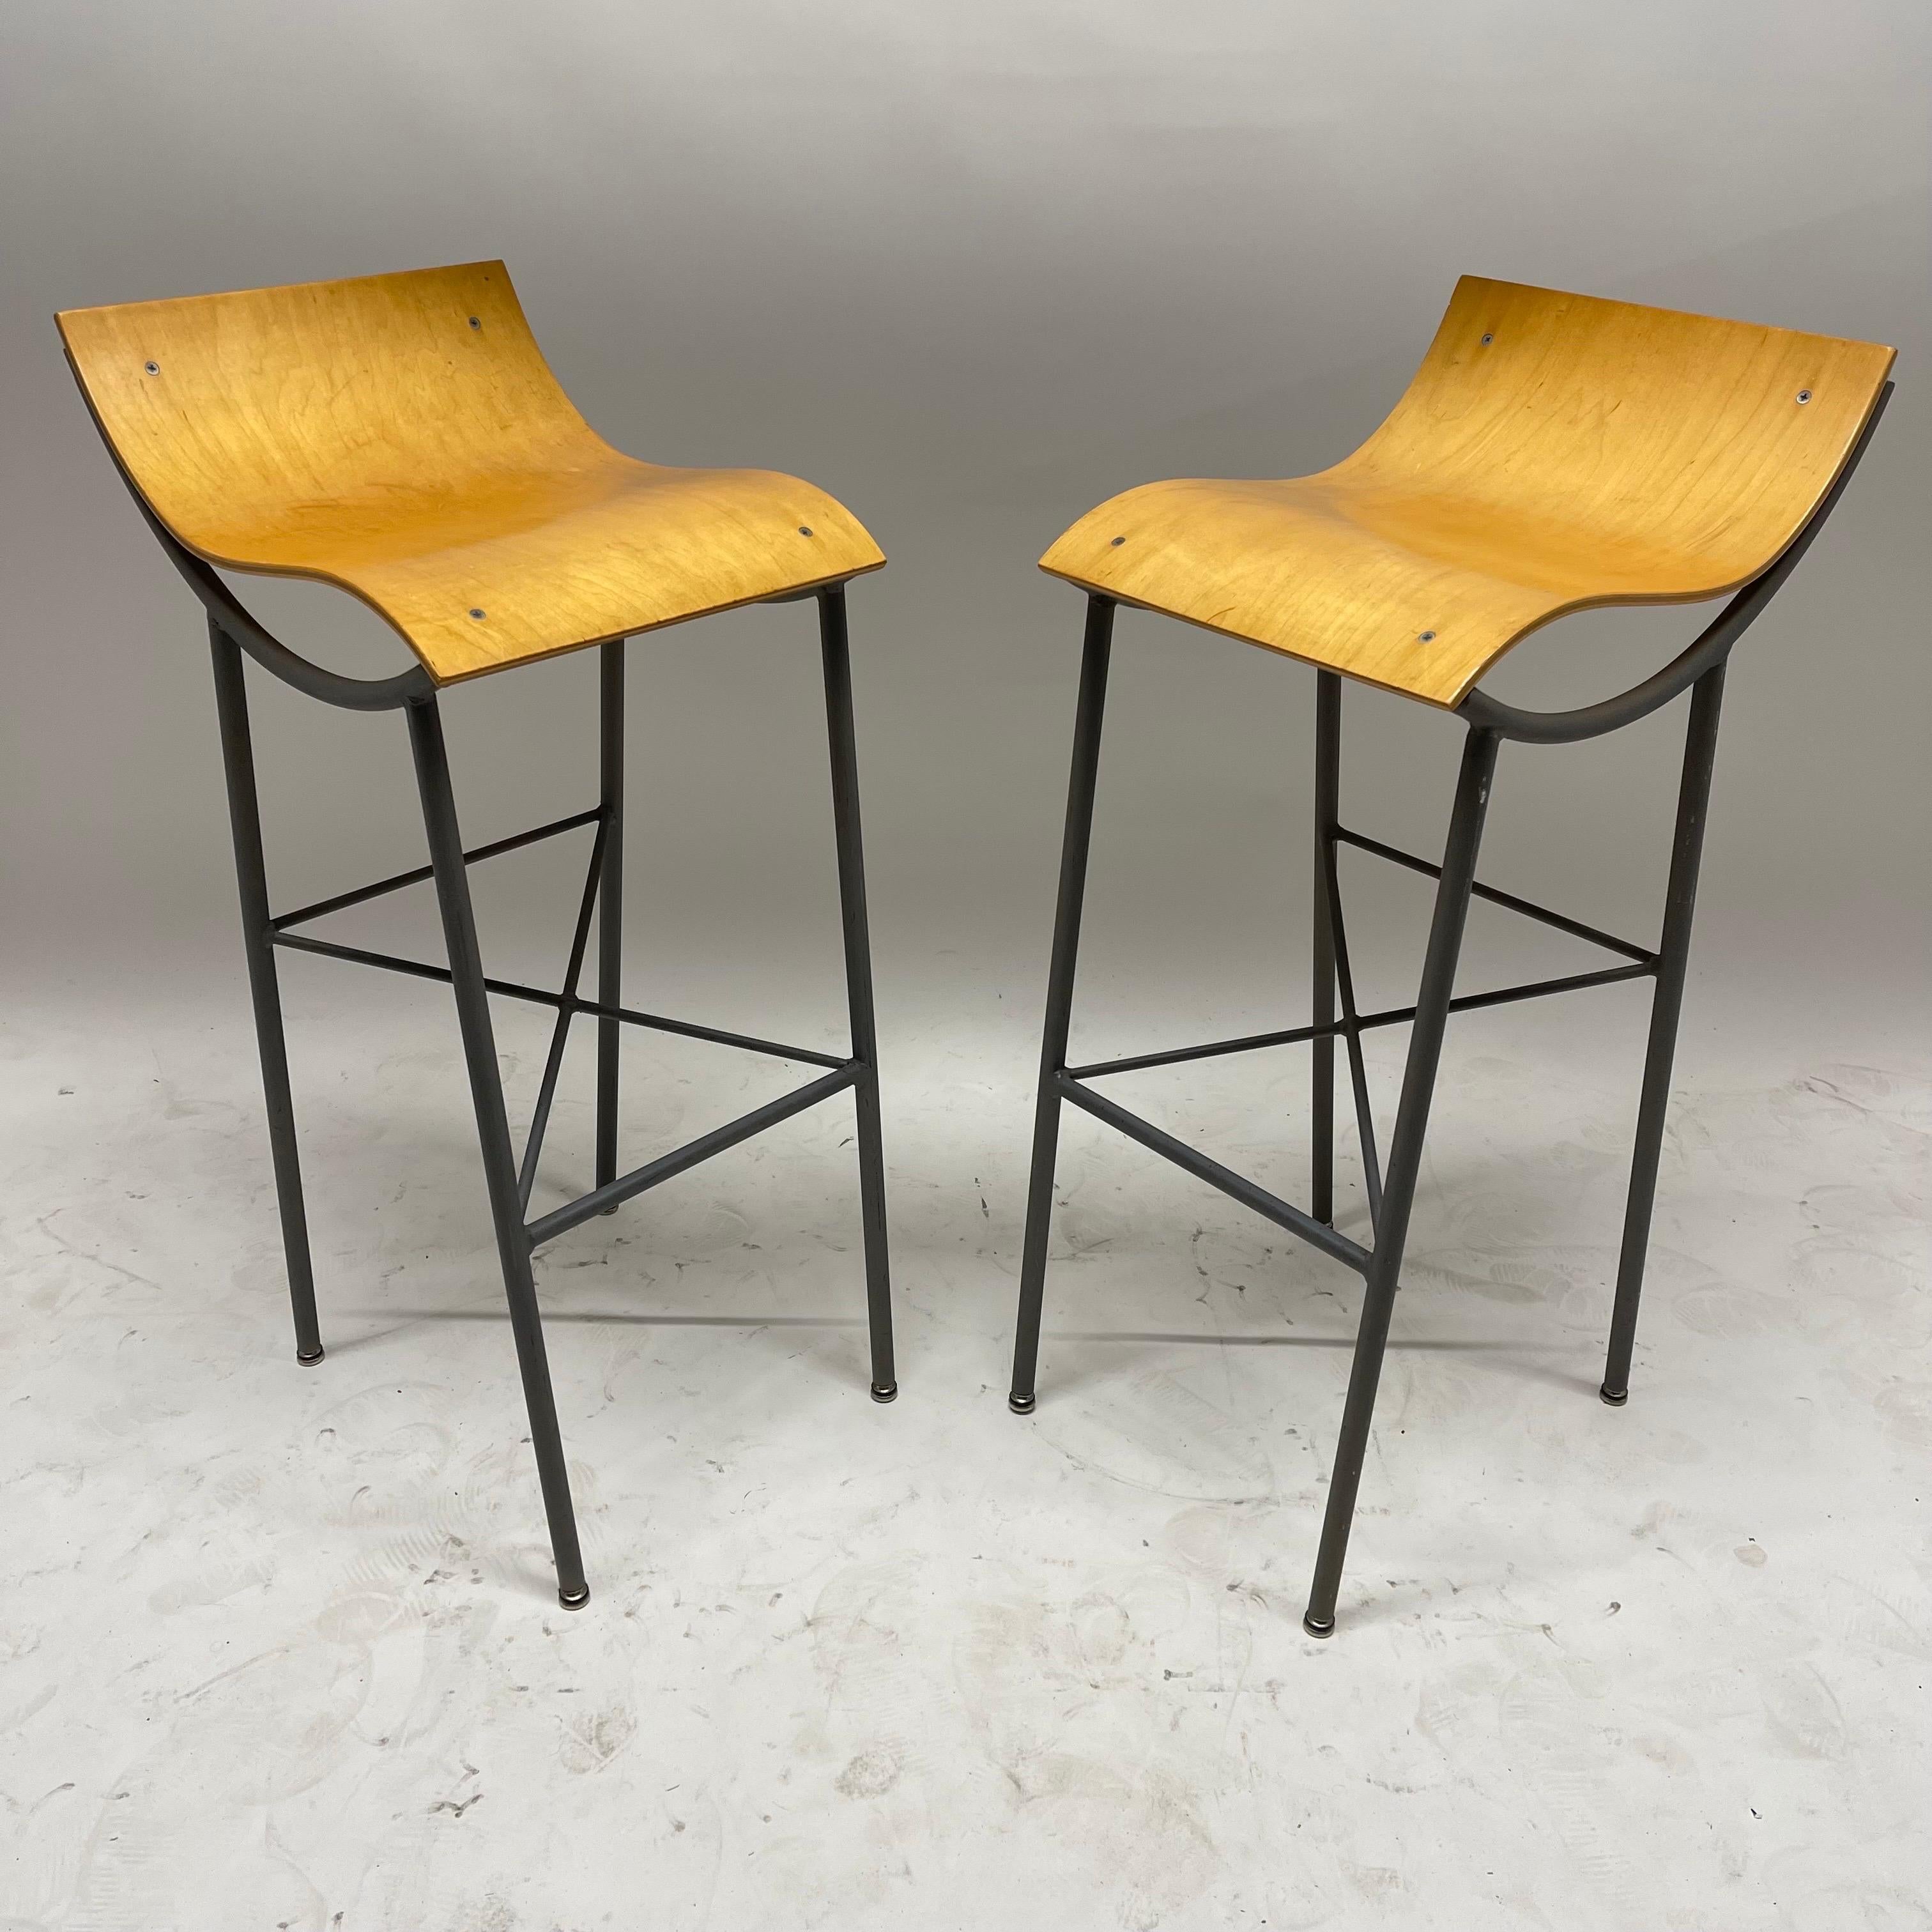 Unique pair of postmodern barstools, rendered in a sculptural architectural welded steel powder coated frame with a hand molded bent plywood seat, circa 1980s, Italy.